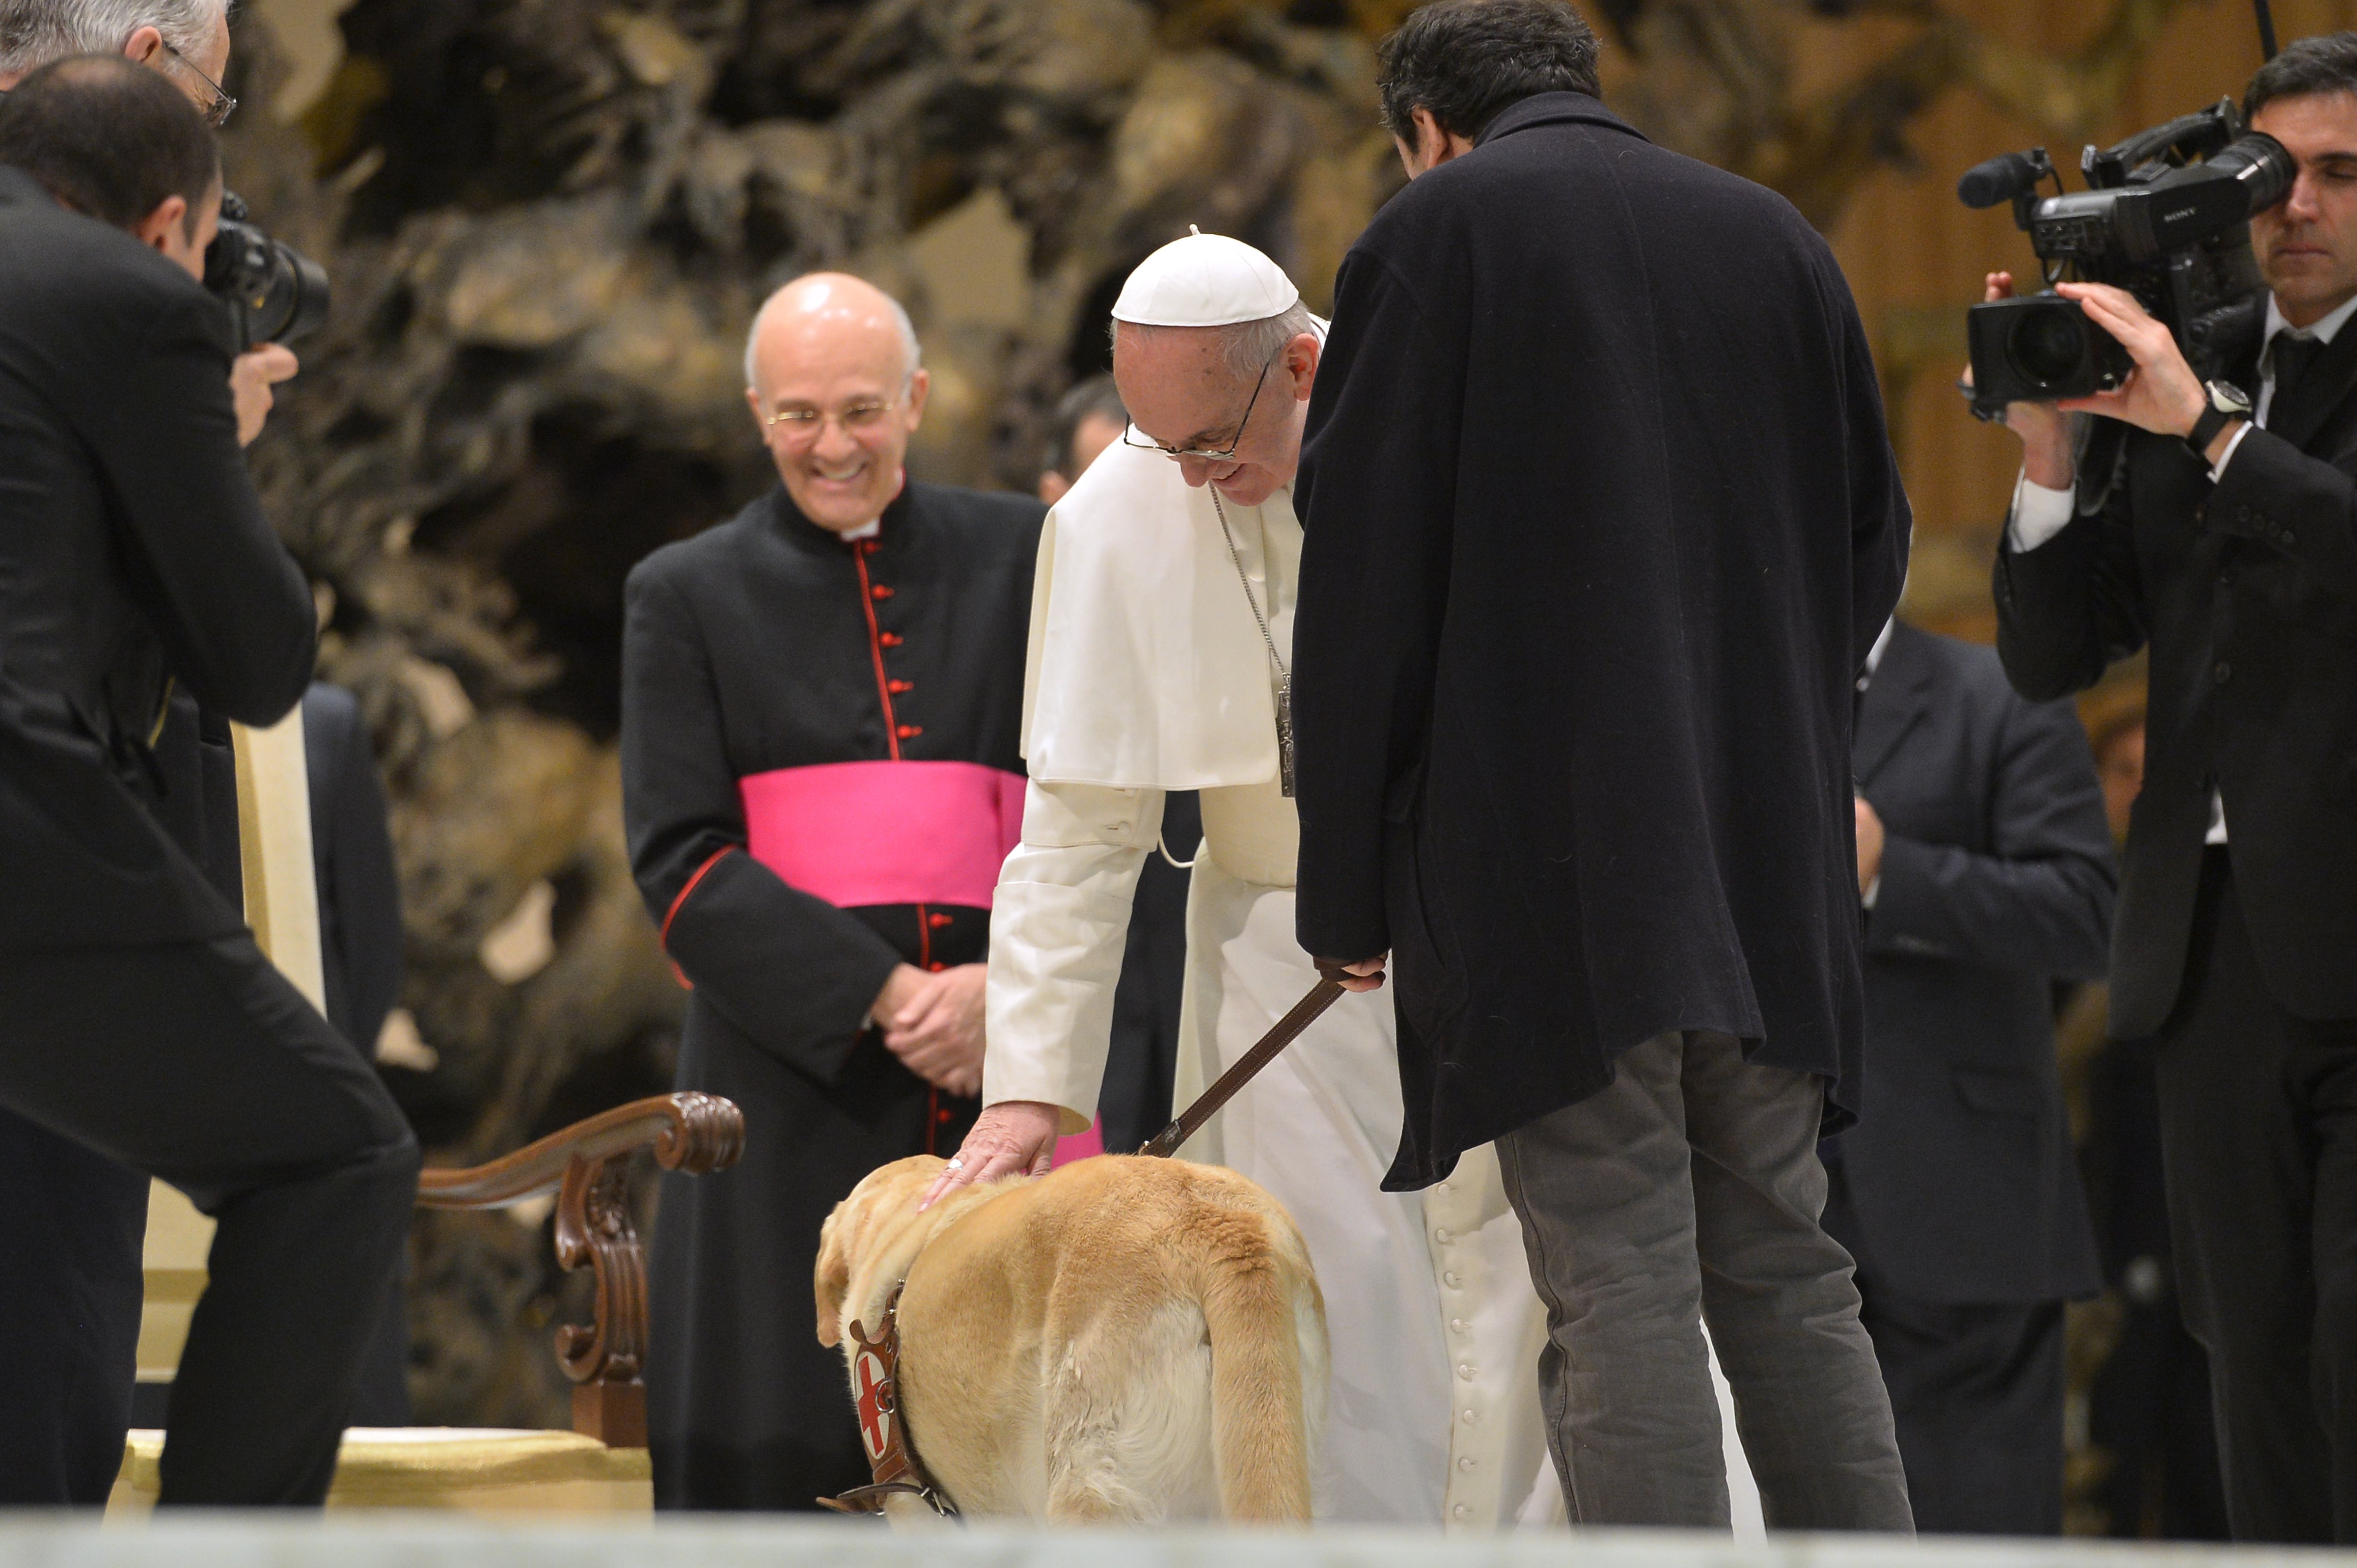 Pope Francis caresses a guide dog during a private audience to members of the media on March 16, 2013 at the Paul VI hall at the Vatican. (ALBERTO PIZZOLI—AFP/Getty Images)